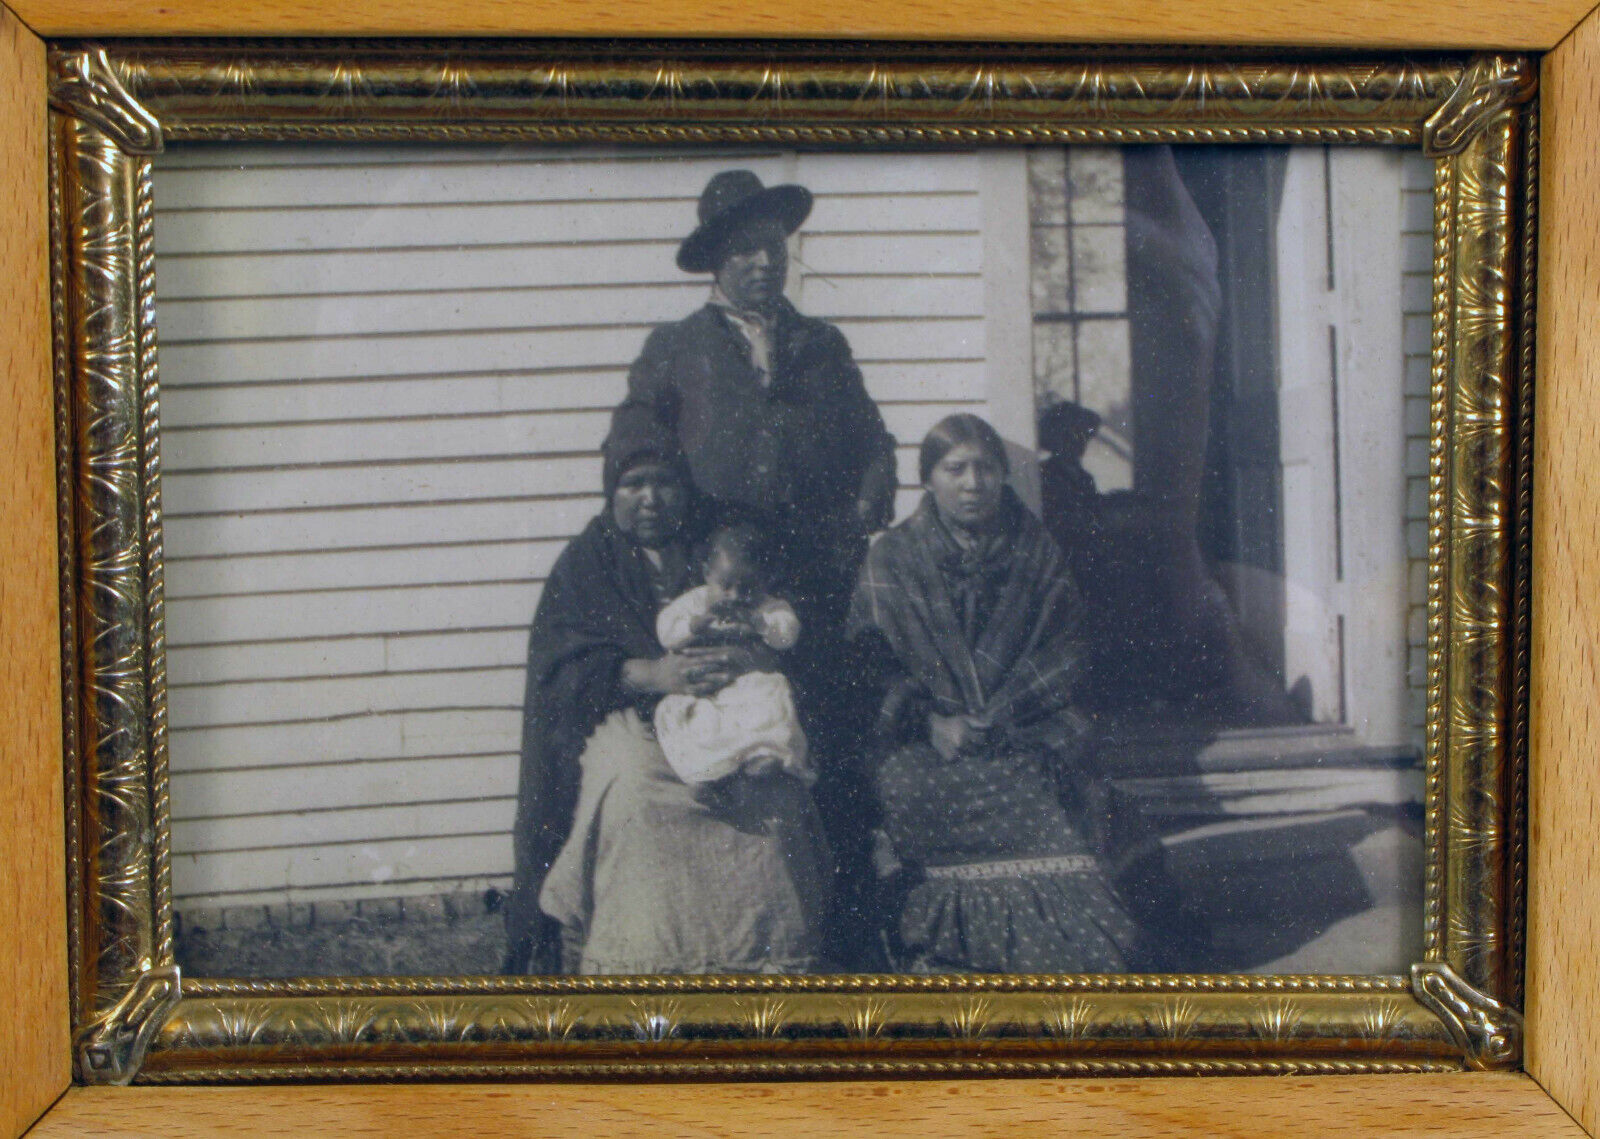 HARMON PERCY MARBLE VINTAGE PHOTOGRAPH NATIVE AMERICAN SIOUX FAMILY RARE 